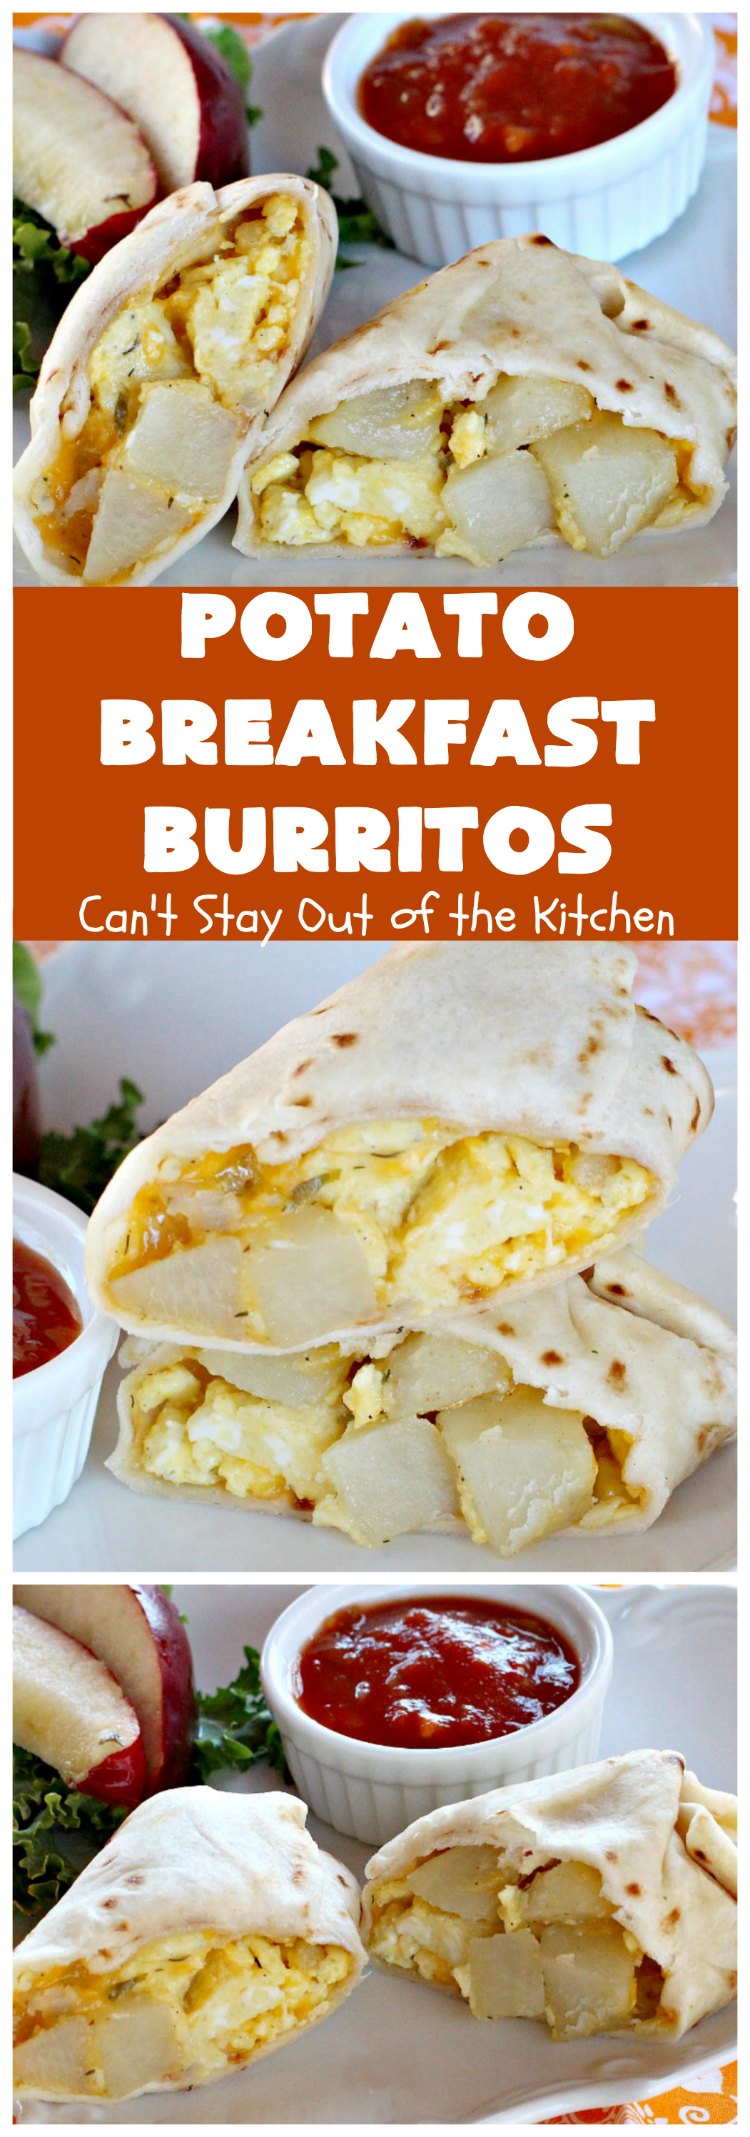 Potato Breakfast Burritos | Can't Stay Out of the Kitchen